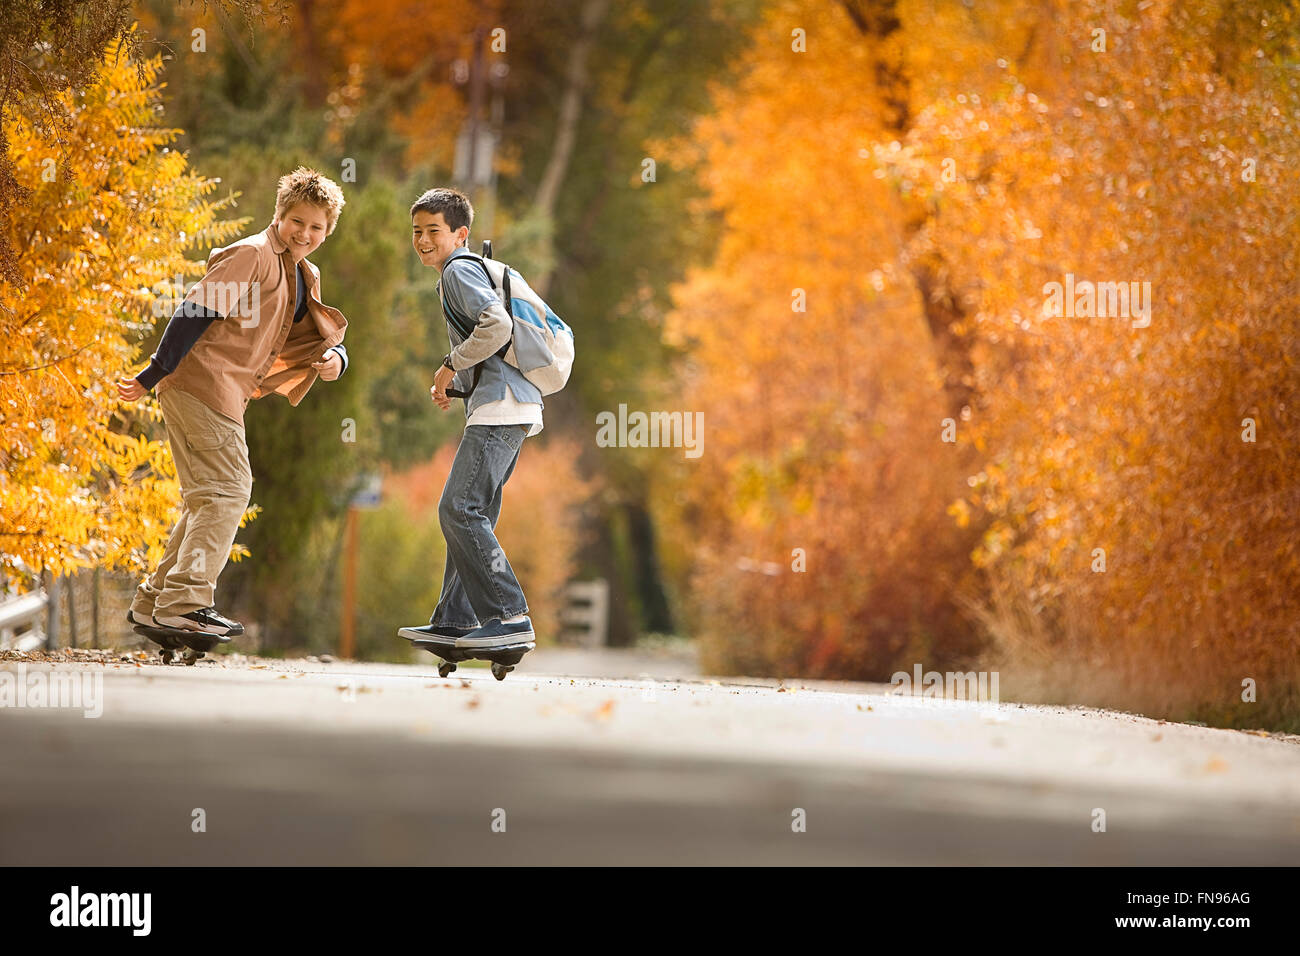 Two boys on skate boards on a roadway in woodland with vivid autumn foliage. Stock Photo